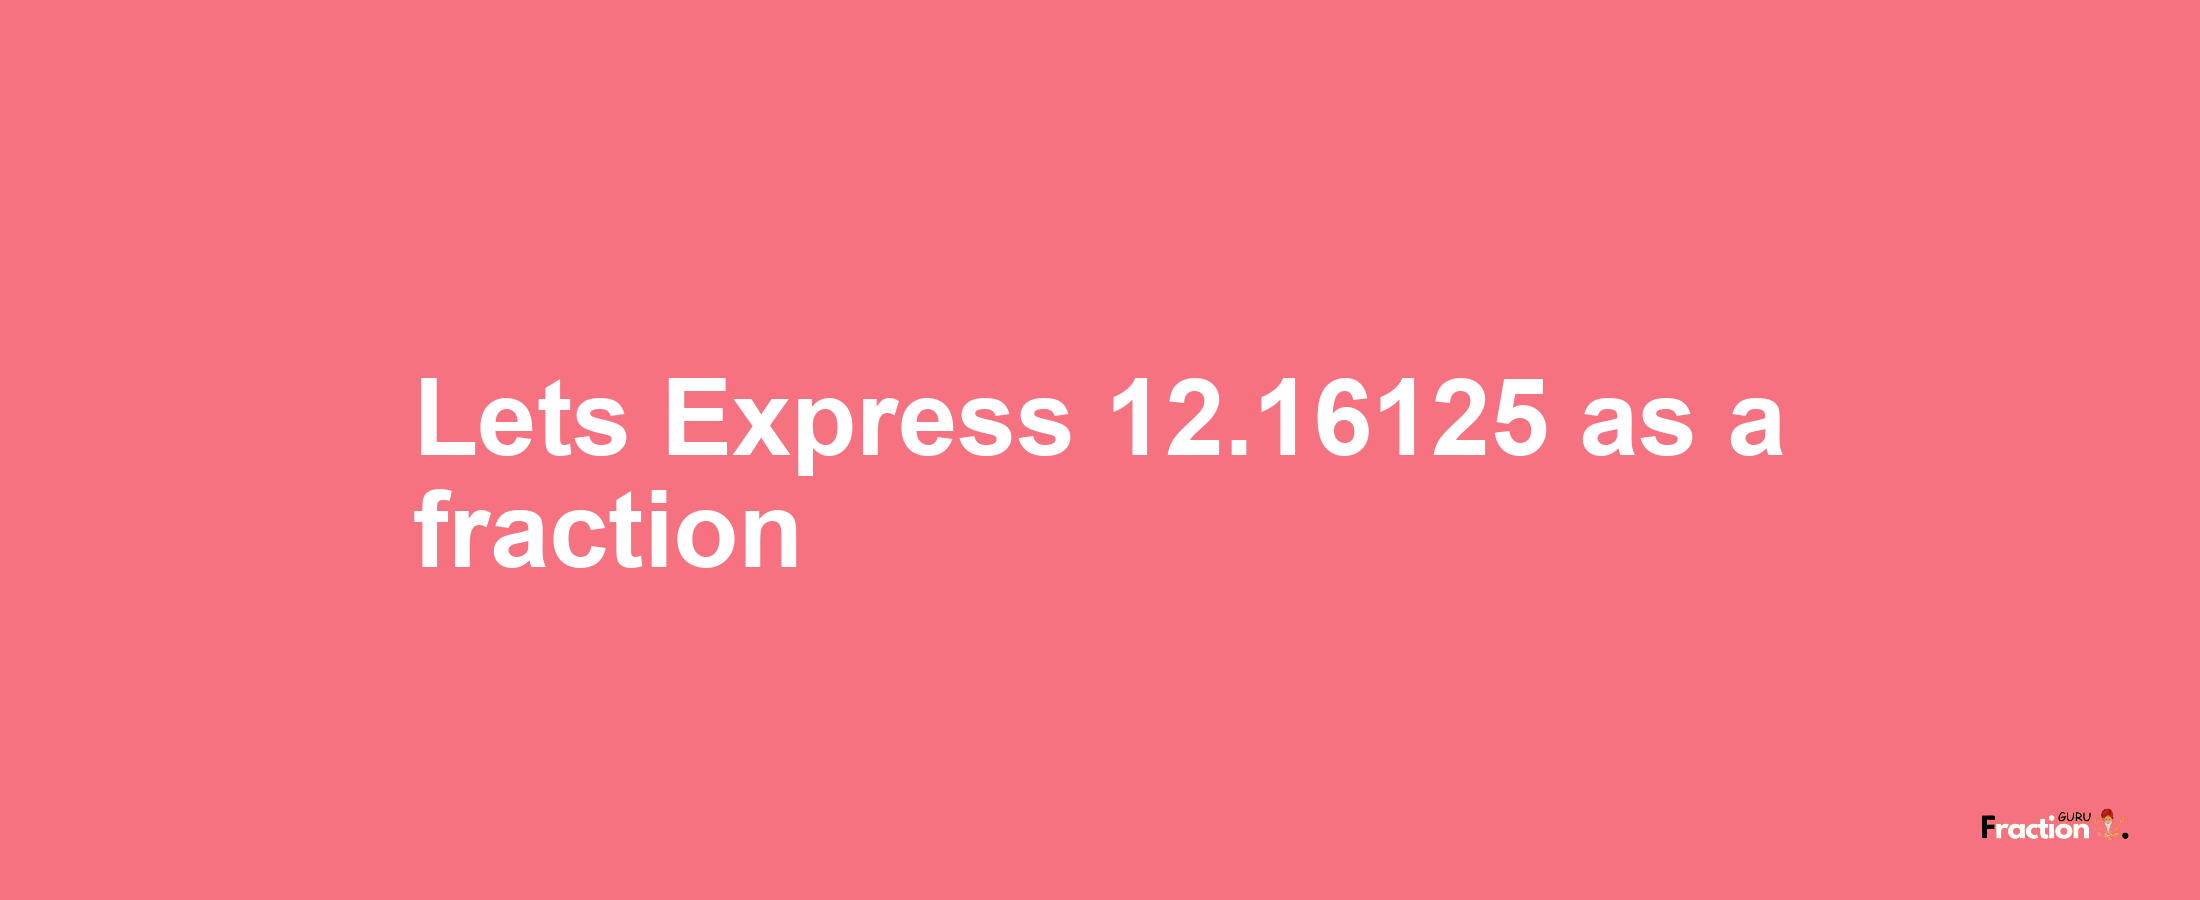 Lets Express 12.16125 as afraction